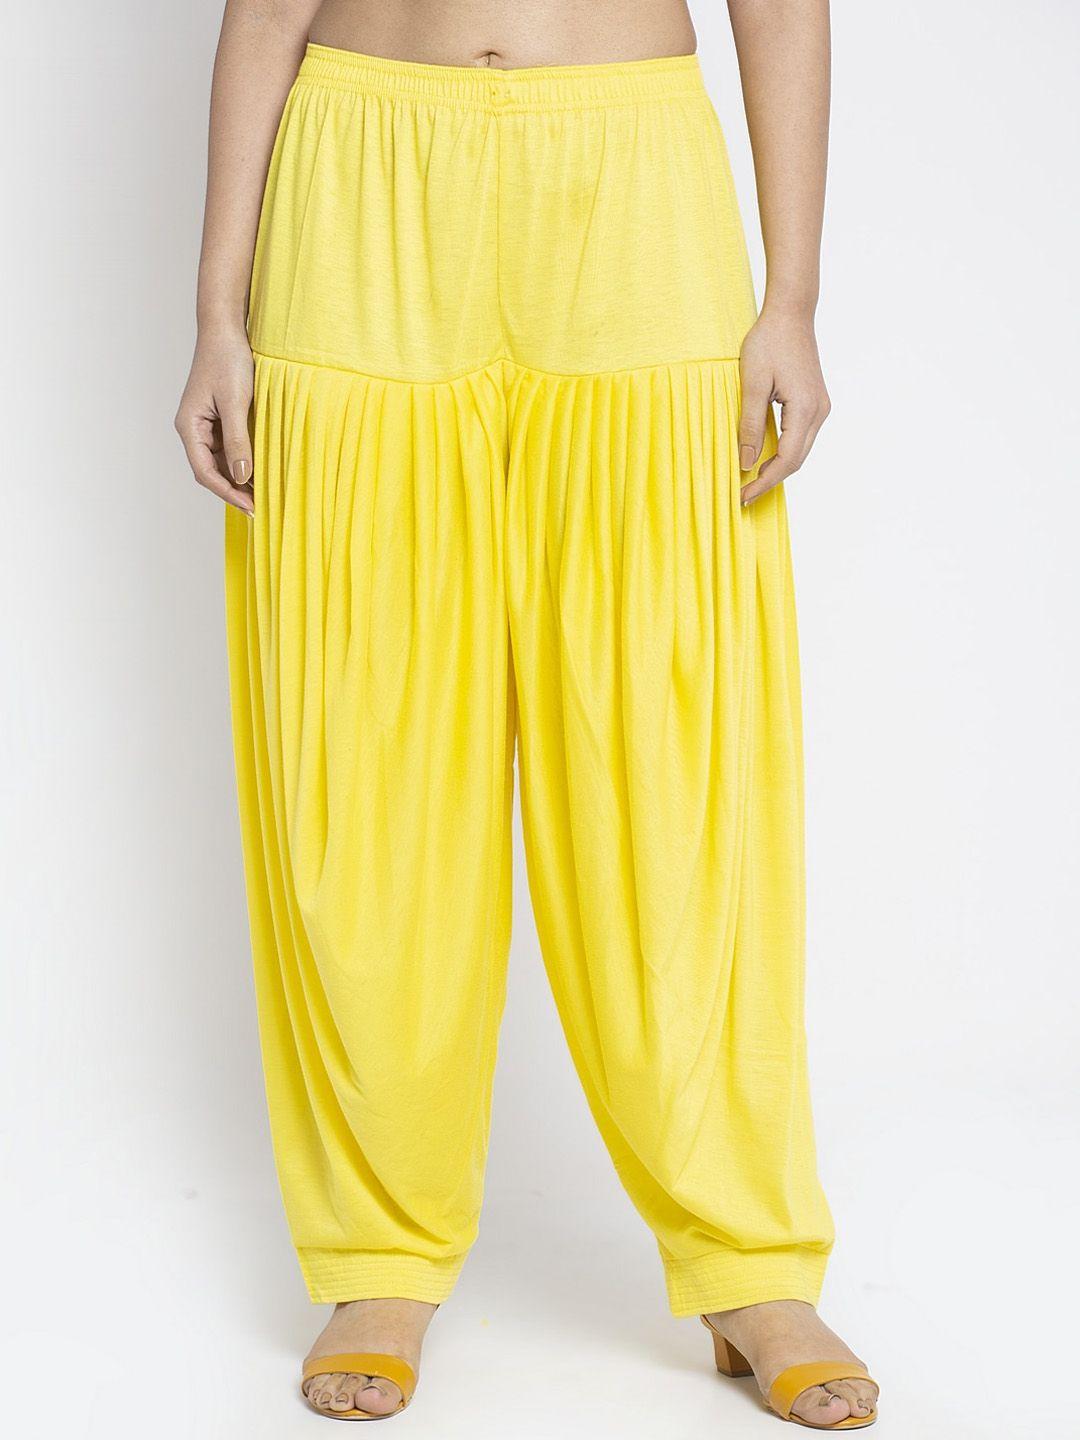 gracit women yellow solid loose-fit patiala